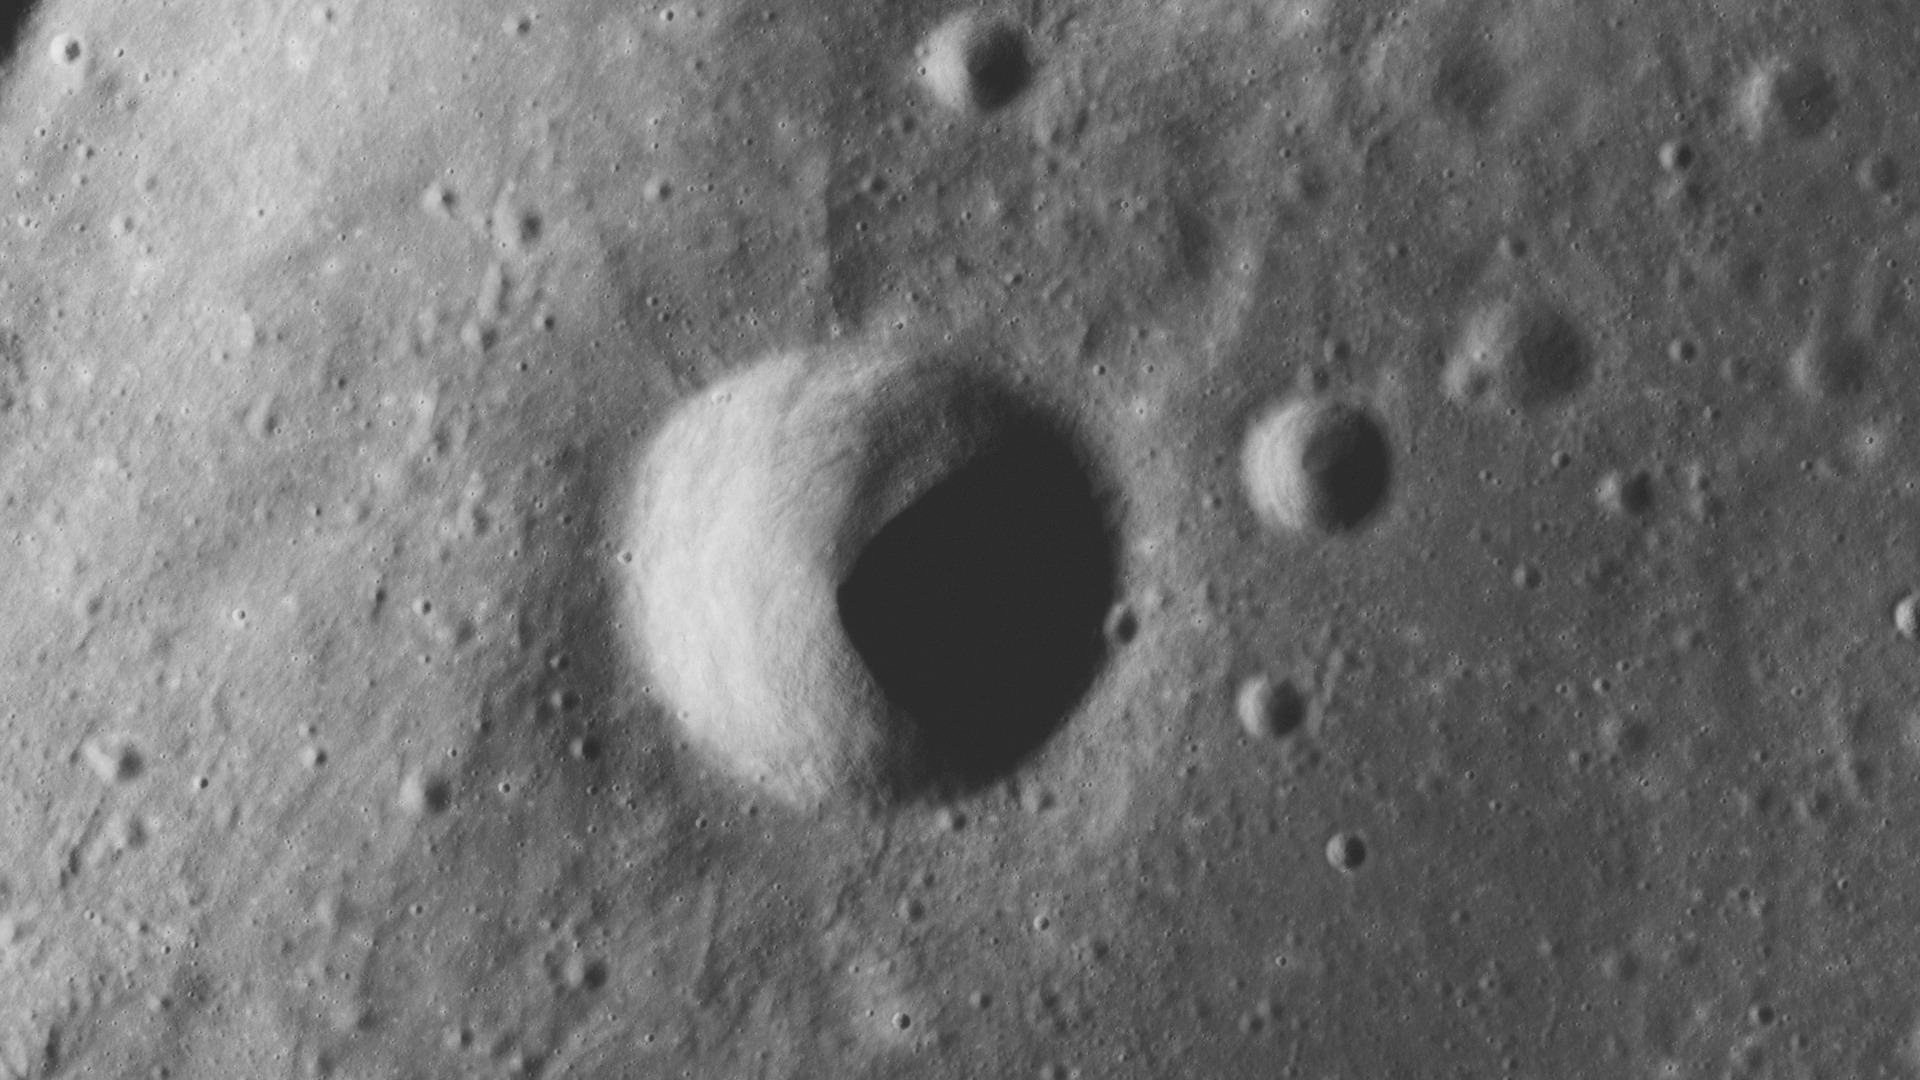 Stereoscopic pair of crater Ruth. Stereoscopic imagery is provided for the left and right eye.